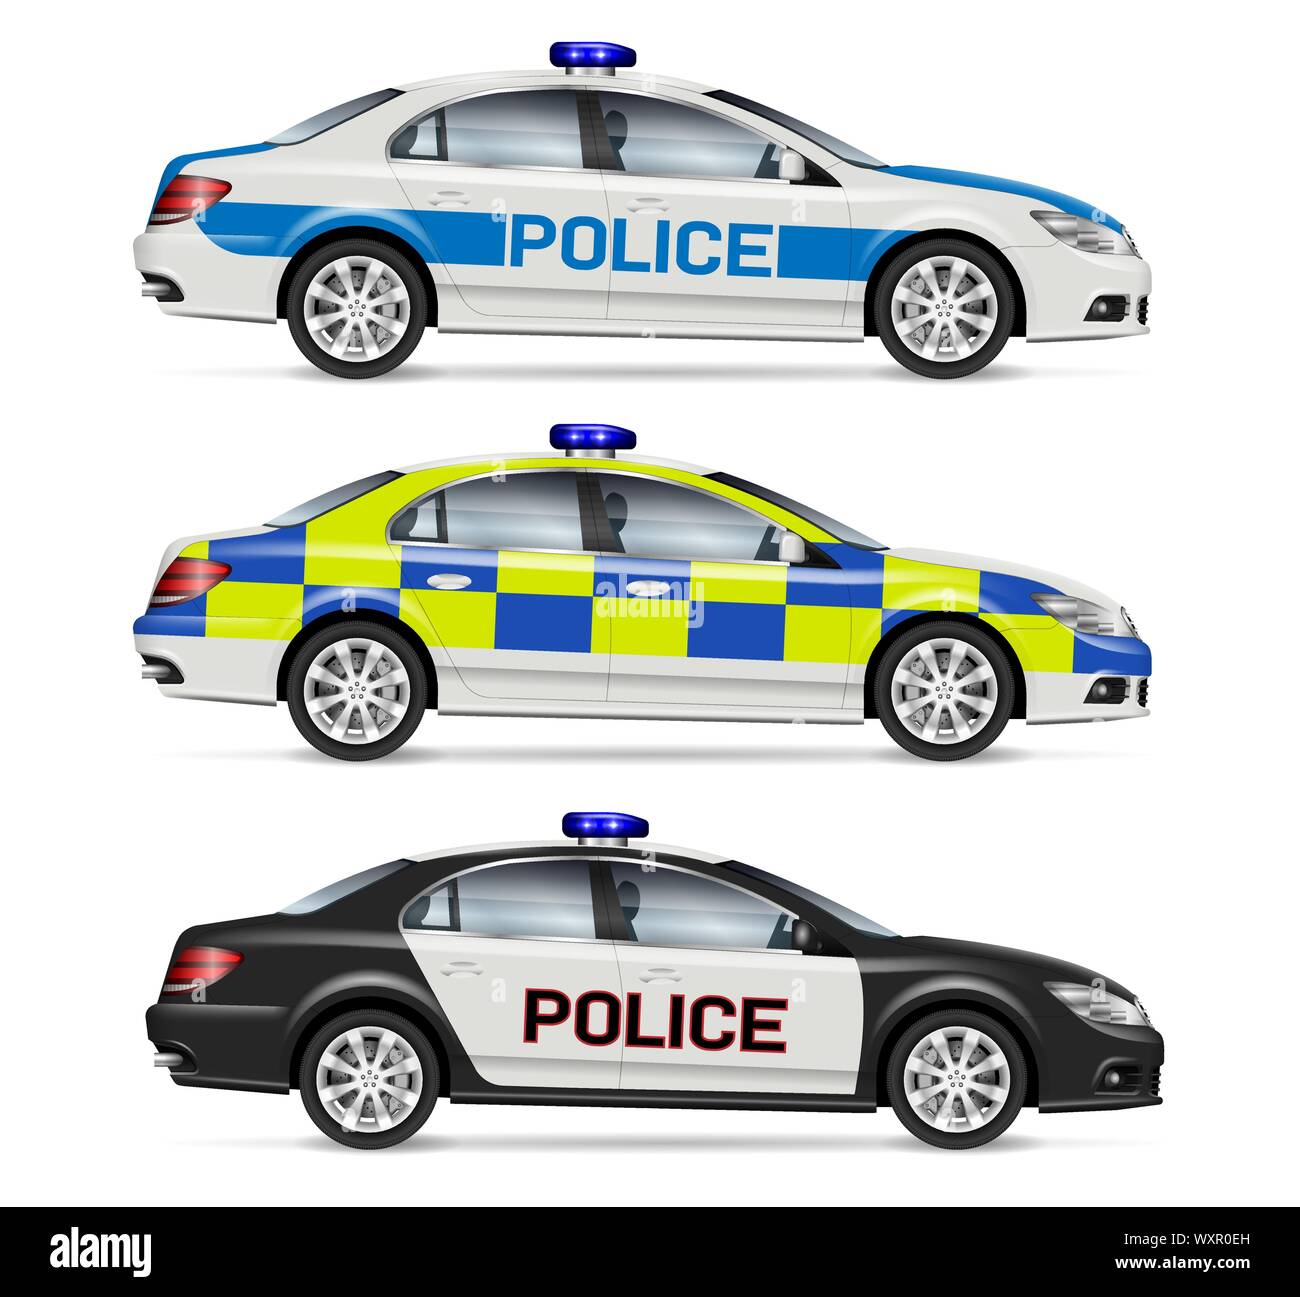 Uk Police Car Side View